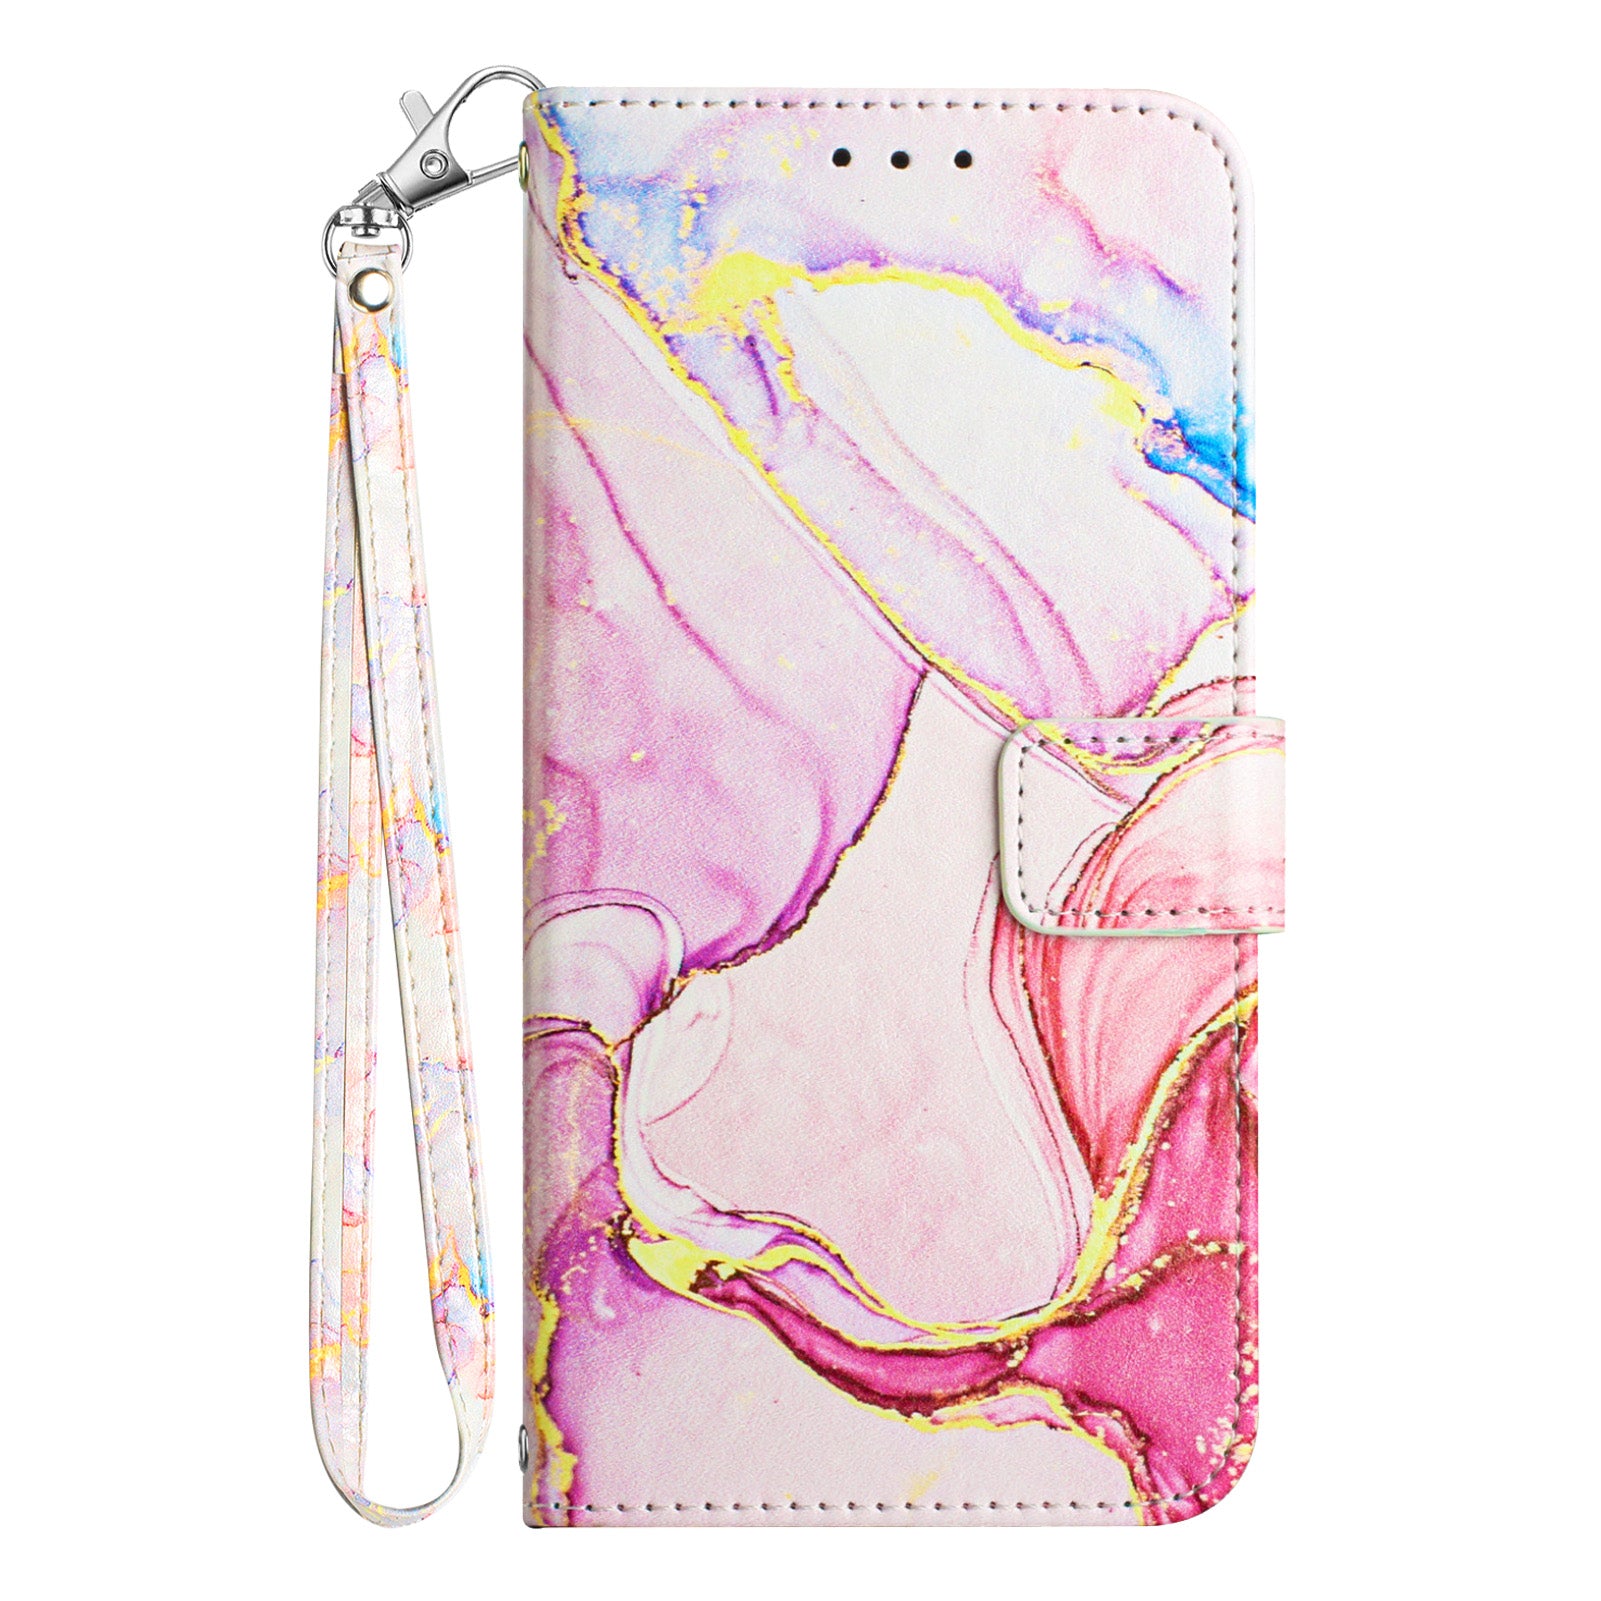 YB Pattern Printing Leather Series-5 For OnePlus 11 5G Marble Pattern Protective Cover Phone Case Wallet - Rose Gold 005